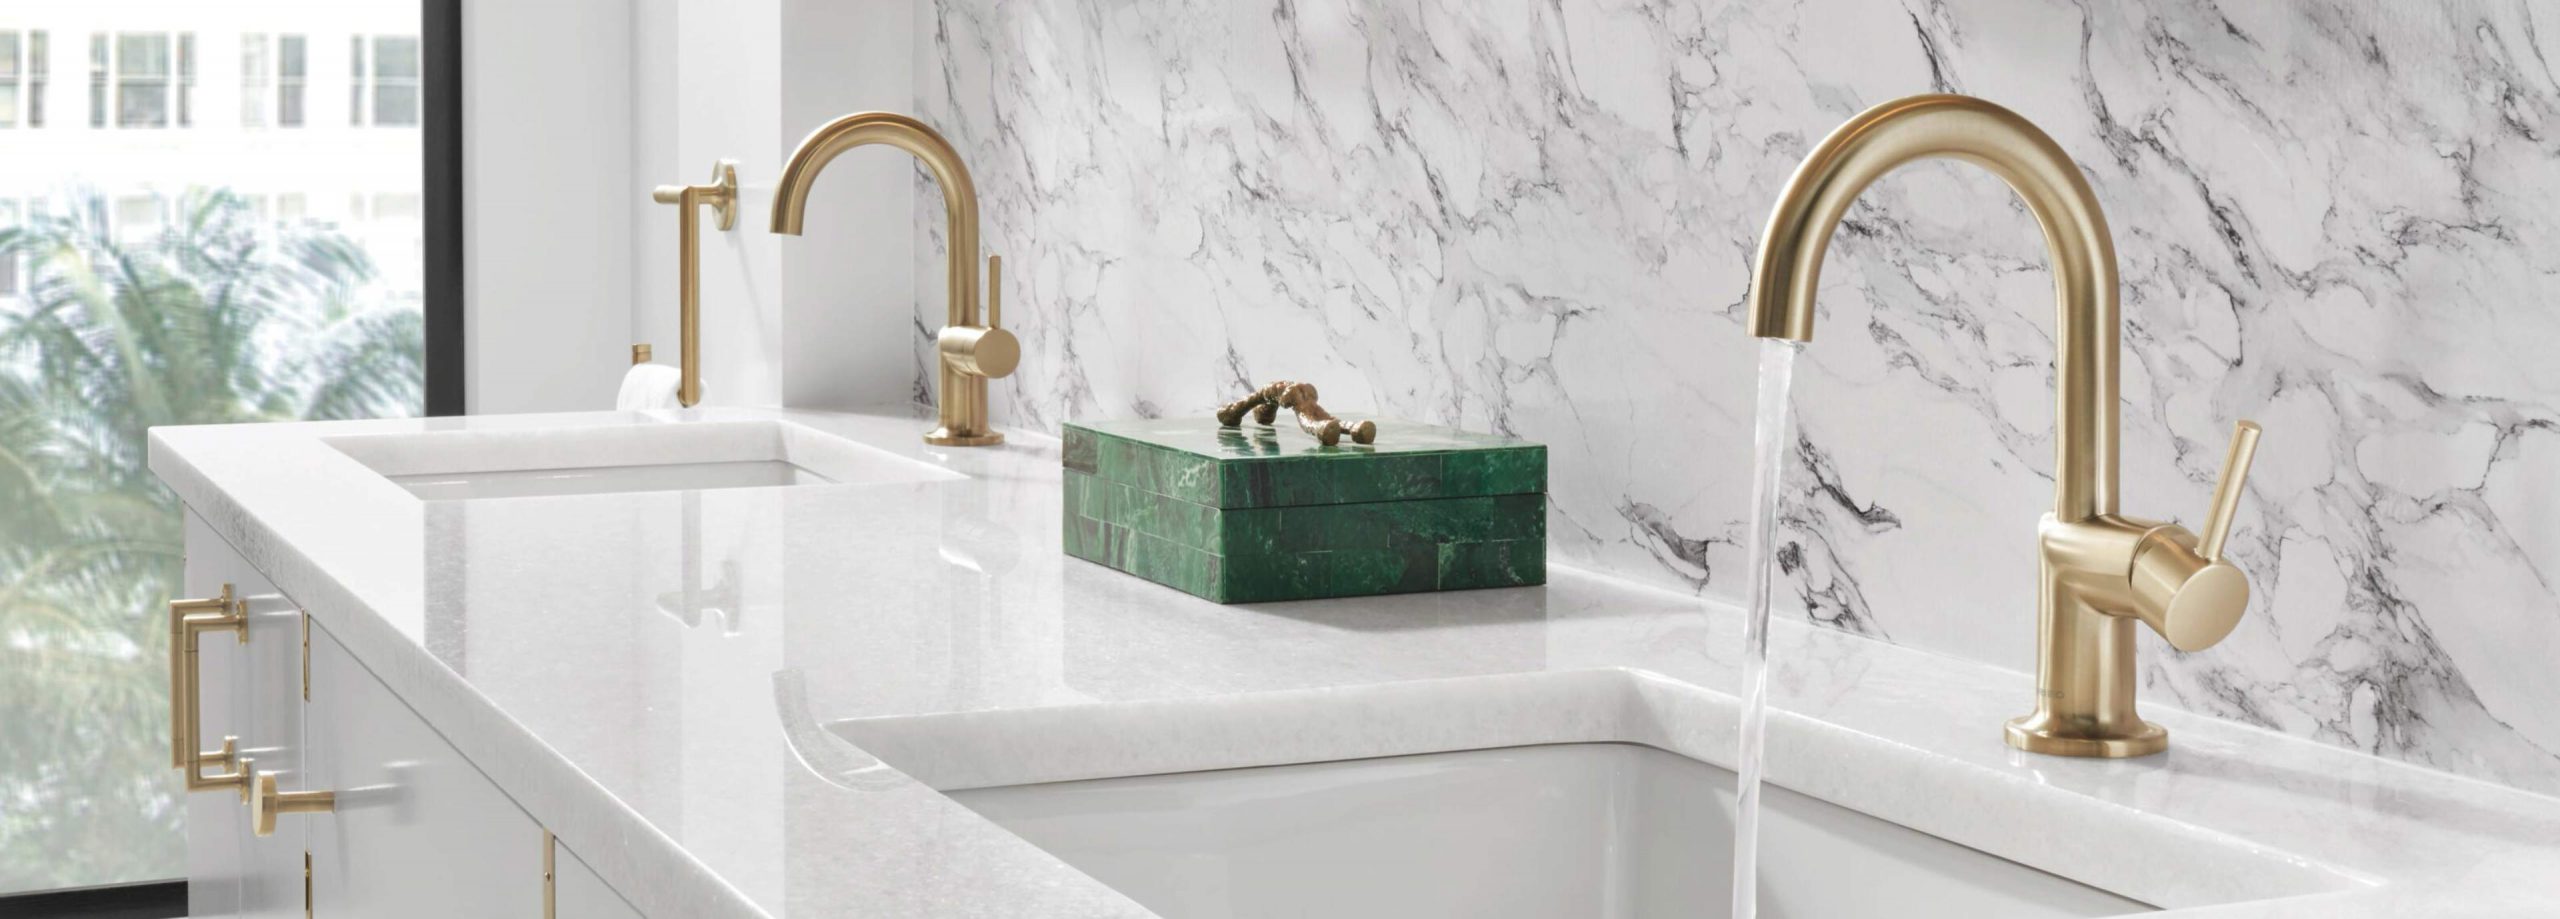 A modern large bathroom with white marble granite and a double vanity with gold plated fixtures